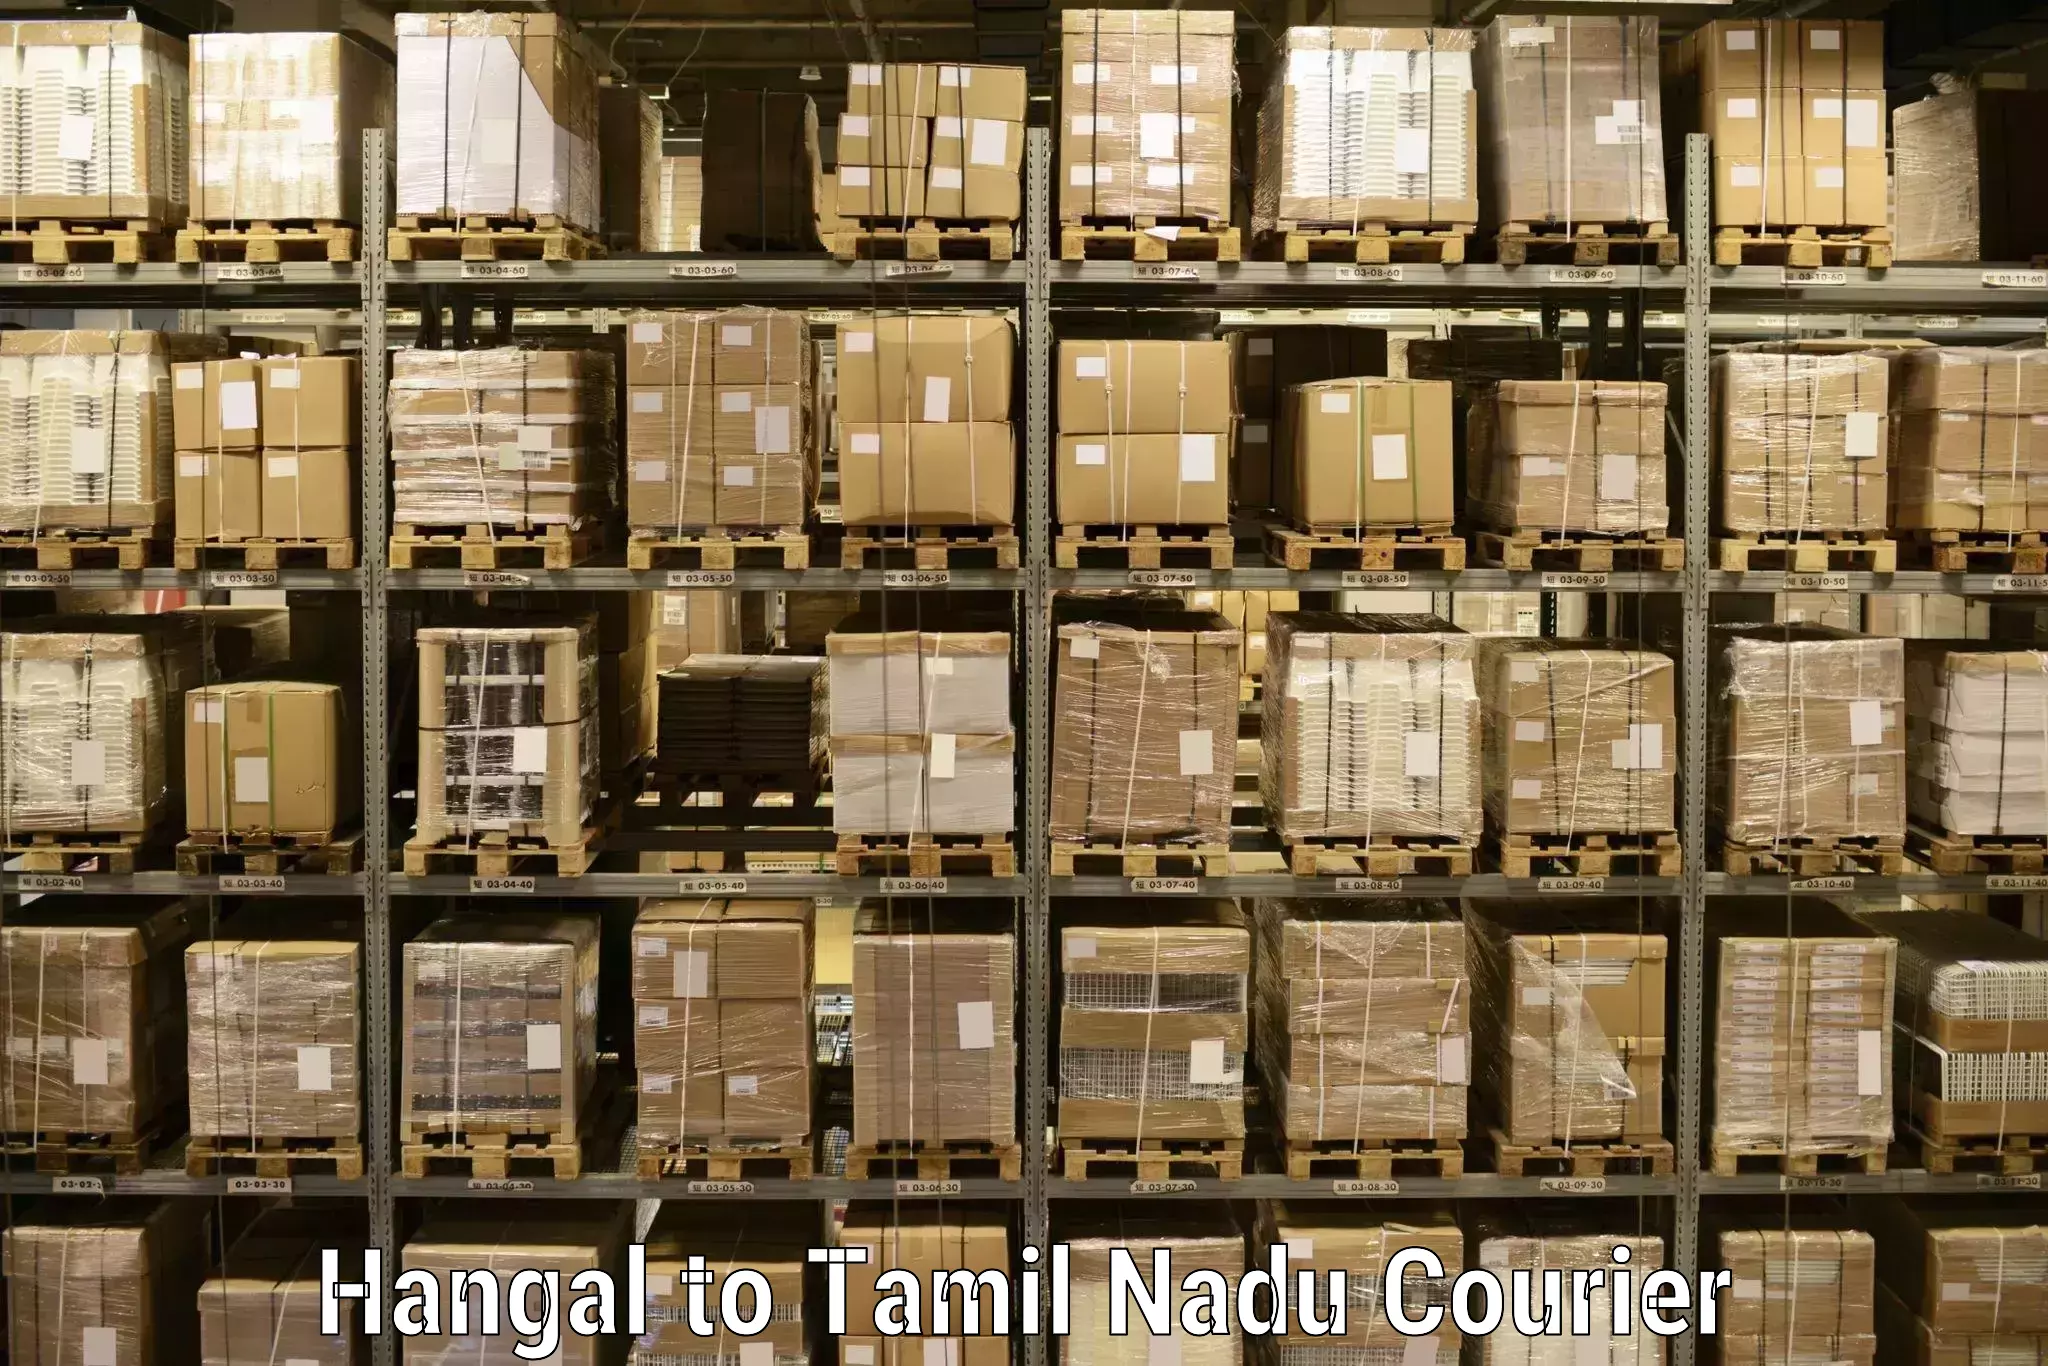 User-friendly delivery service Hangal to Tamil Nadu